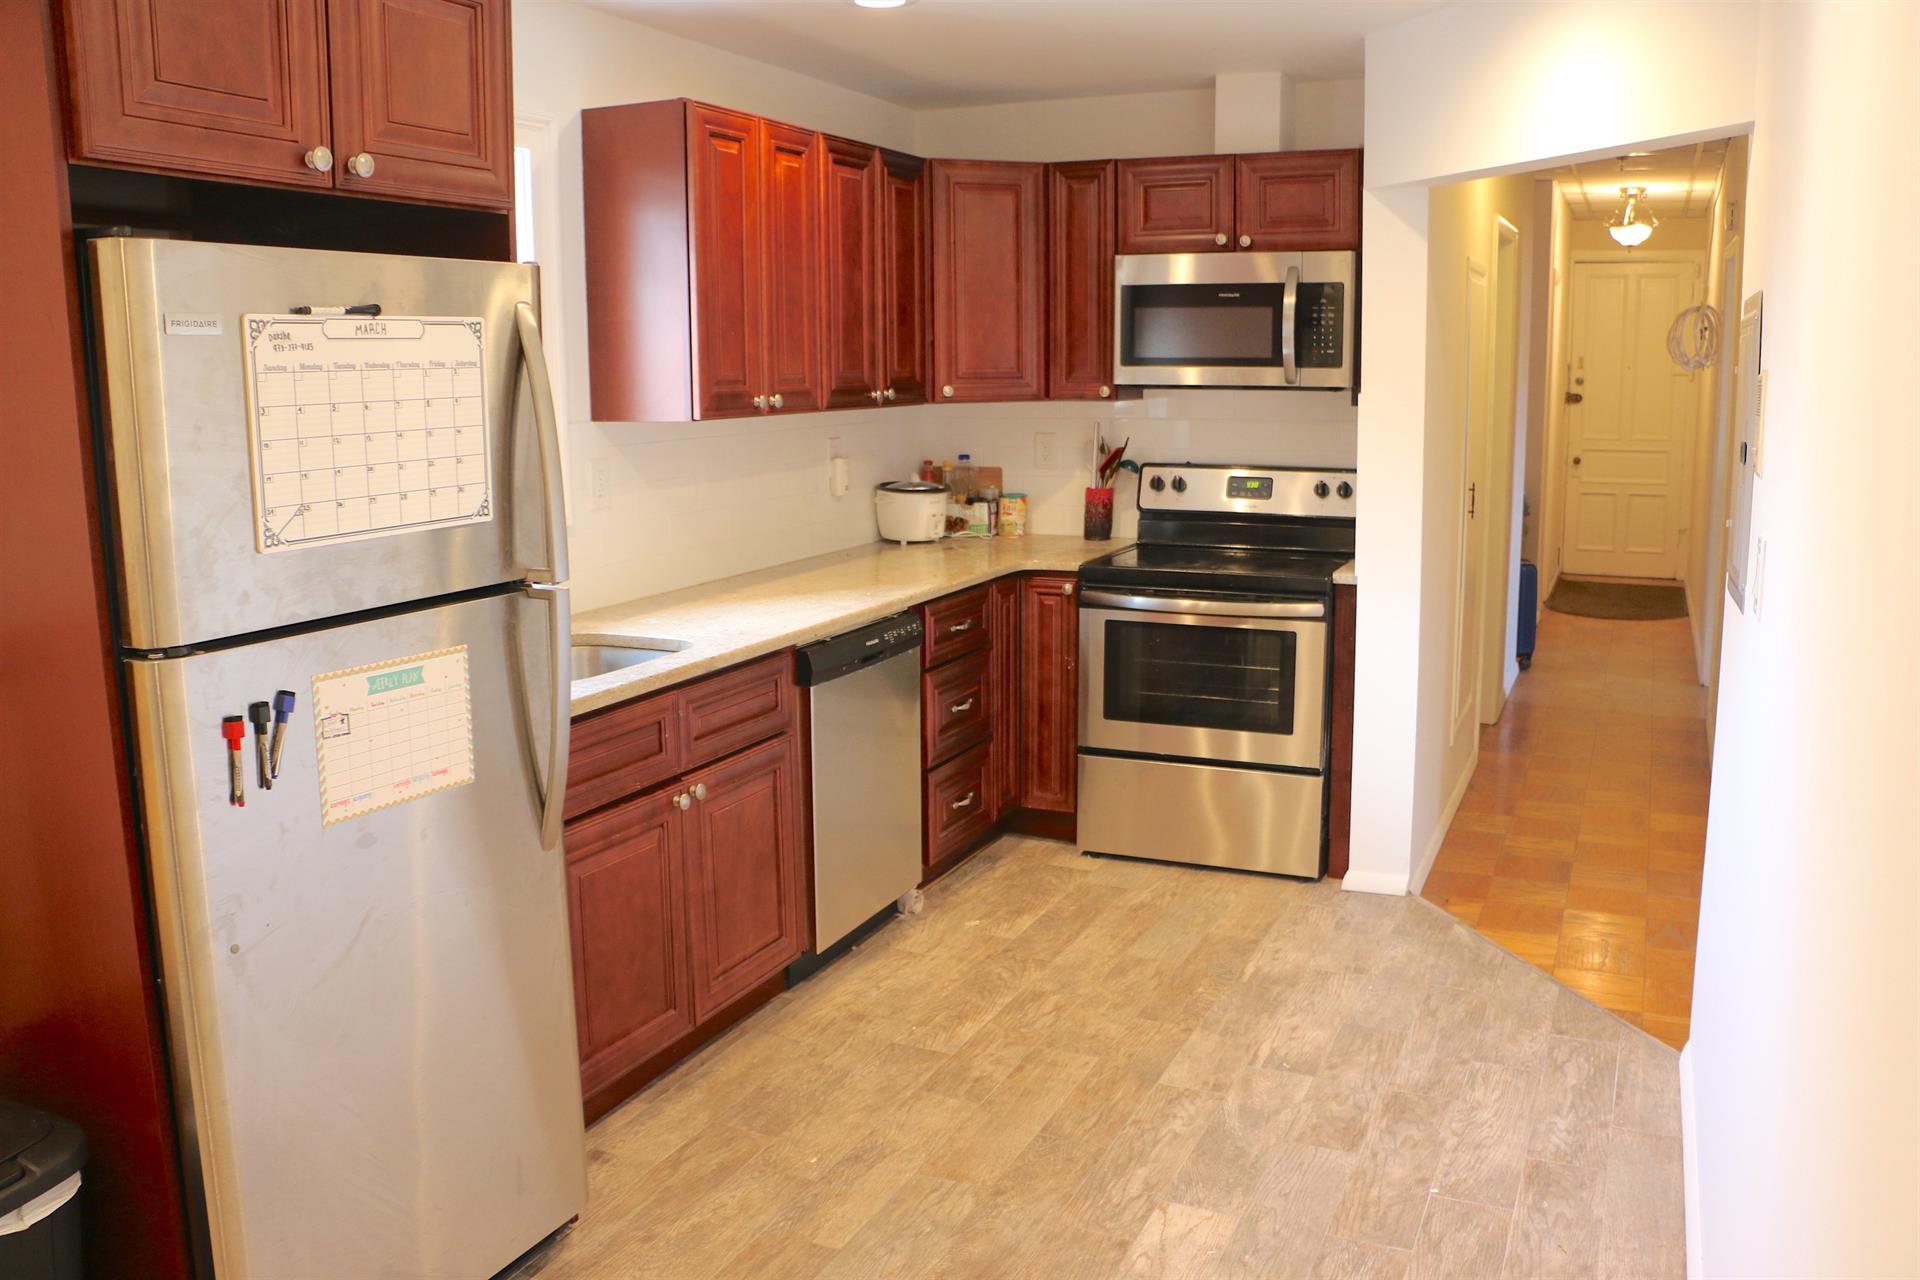 AVAILABLE AUGUST 1ST --- Prime Location - Renovated Two bed plus den apartment, new bathroom and kitchen with brand new stainless steel appliances. Nice size rooms, large open living room, hardwood floors, heat and hot water included in the rent, Washer/dryer in bldg - Close to all NYC transportation, restaurants, shopping, schools, parks, houses of worship, and more! Schedule a viewing today!